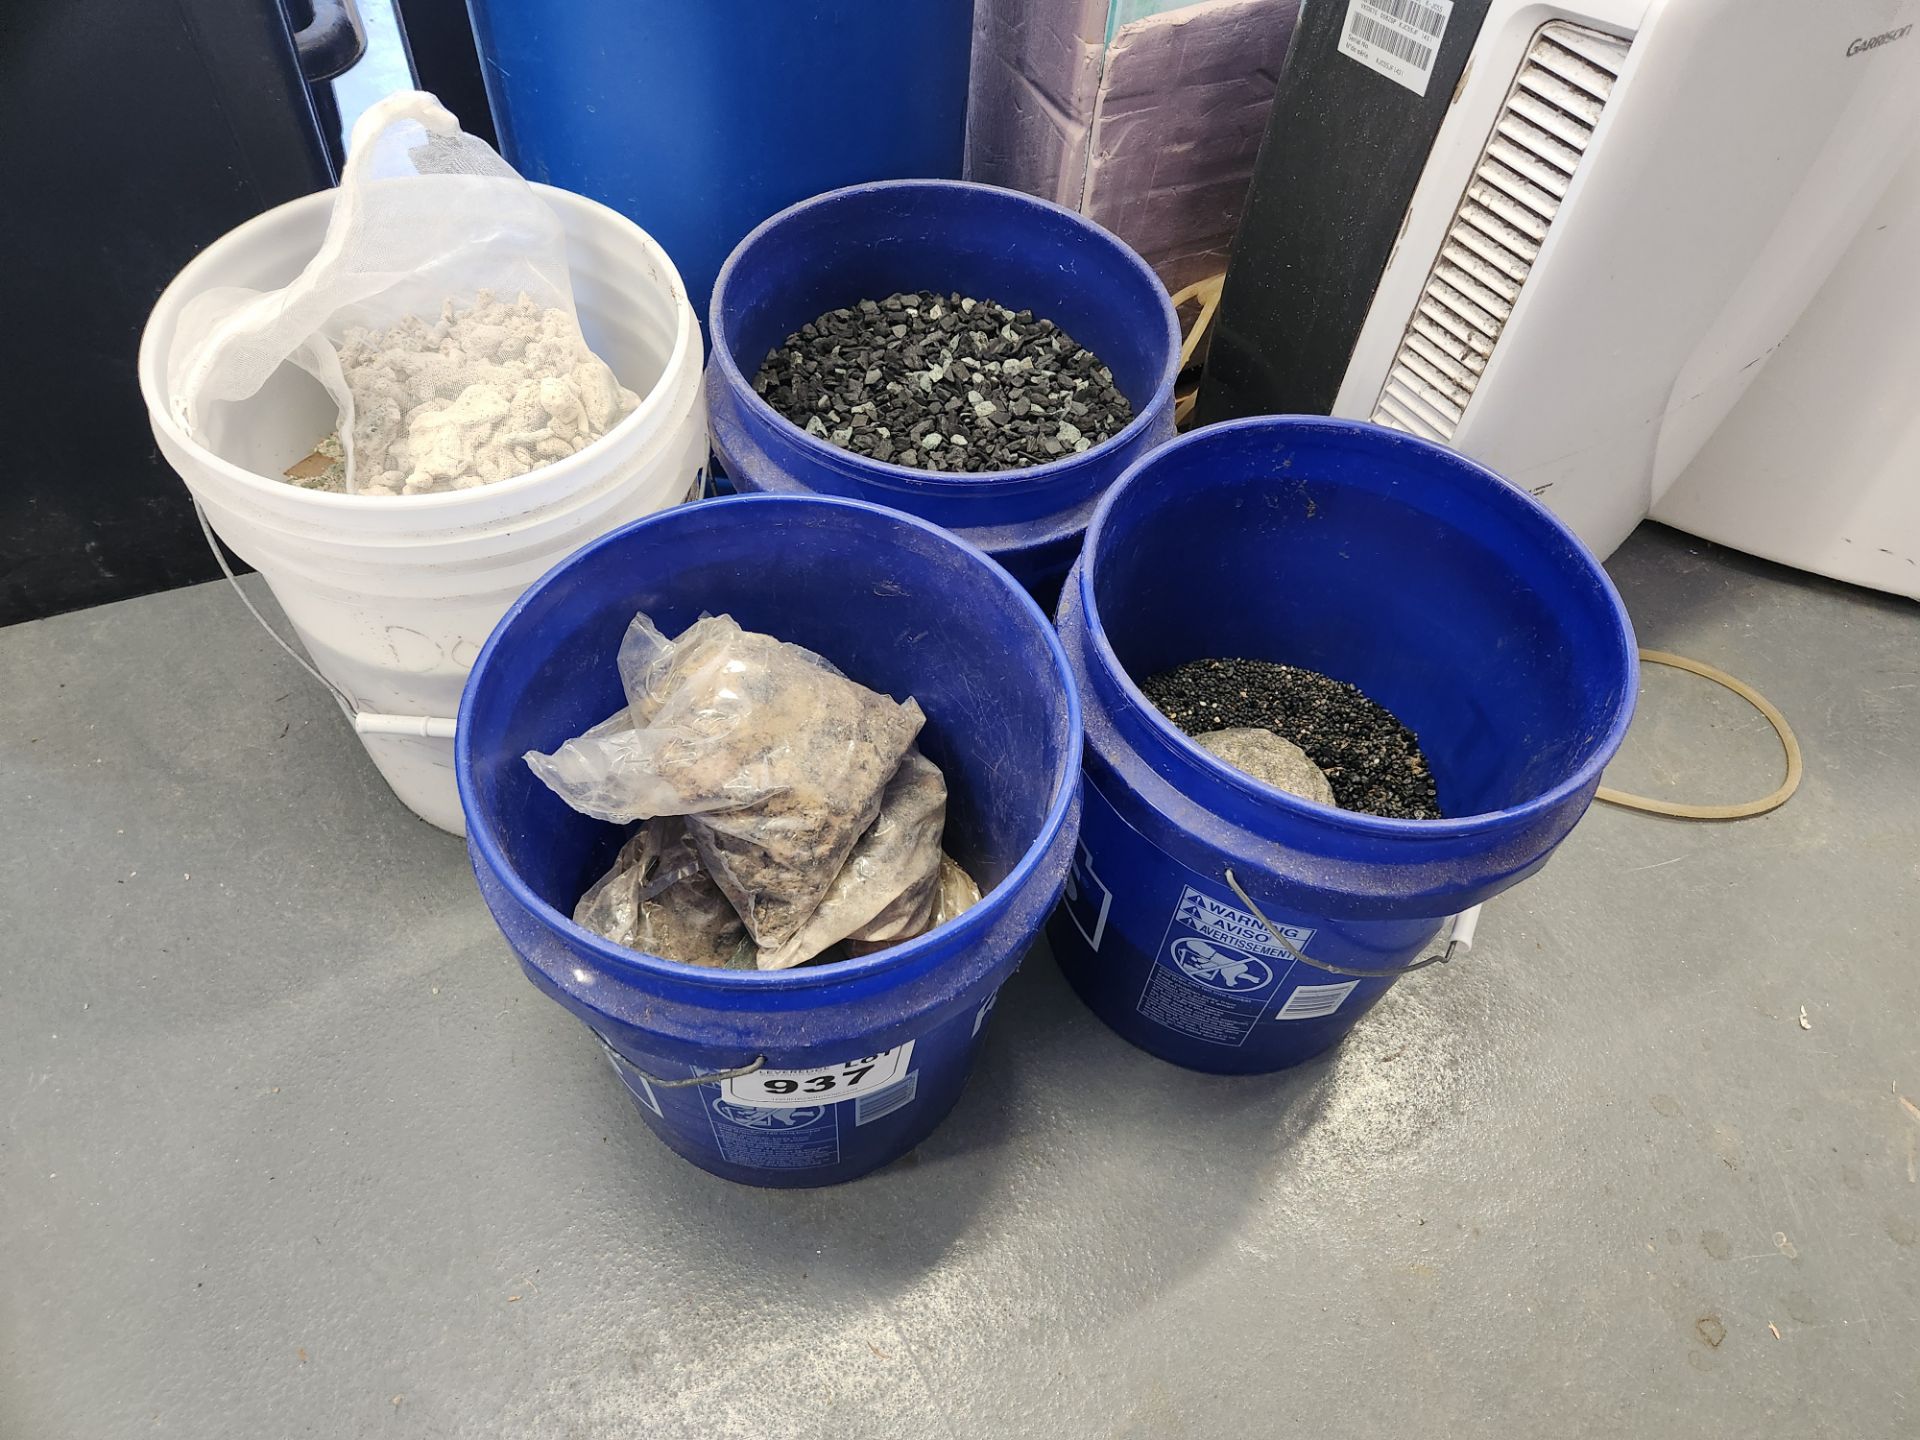 Lot of Pails w/ Substrate